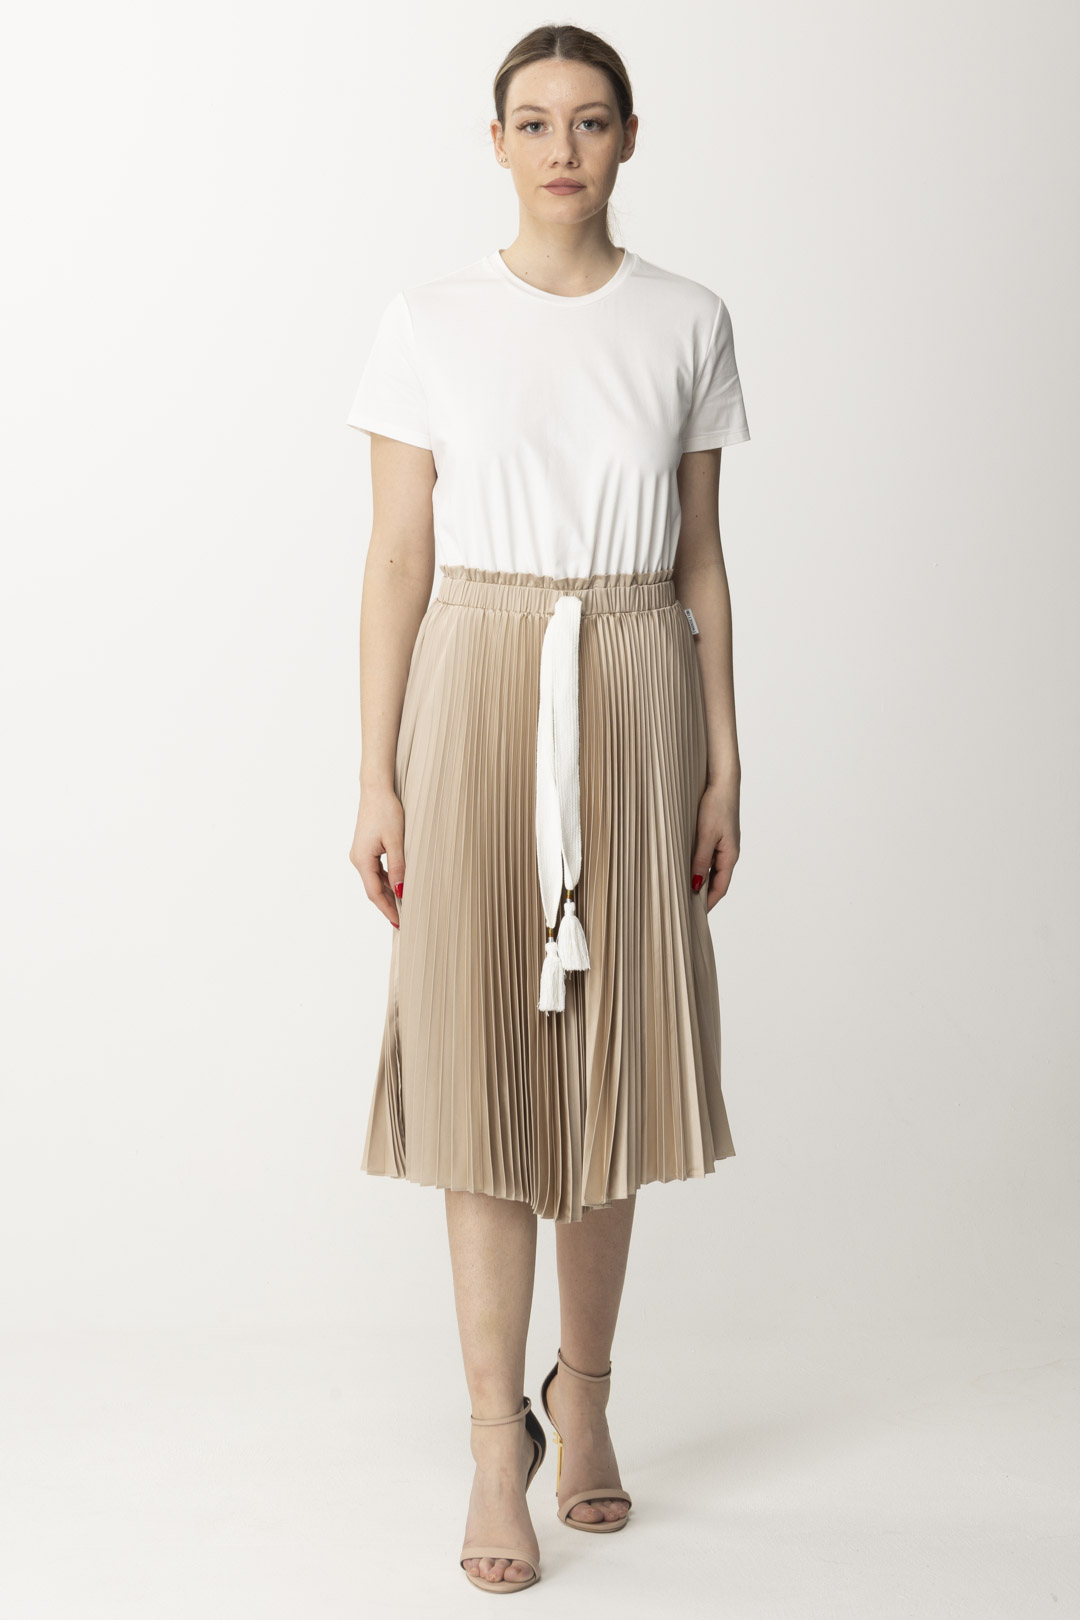 Preview: Twin-Set Midi dress with pleated satin BIC CHAMPAGNE/OFF WHITE